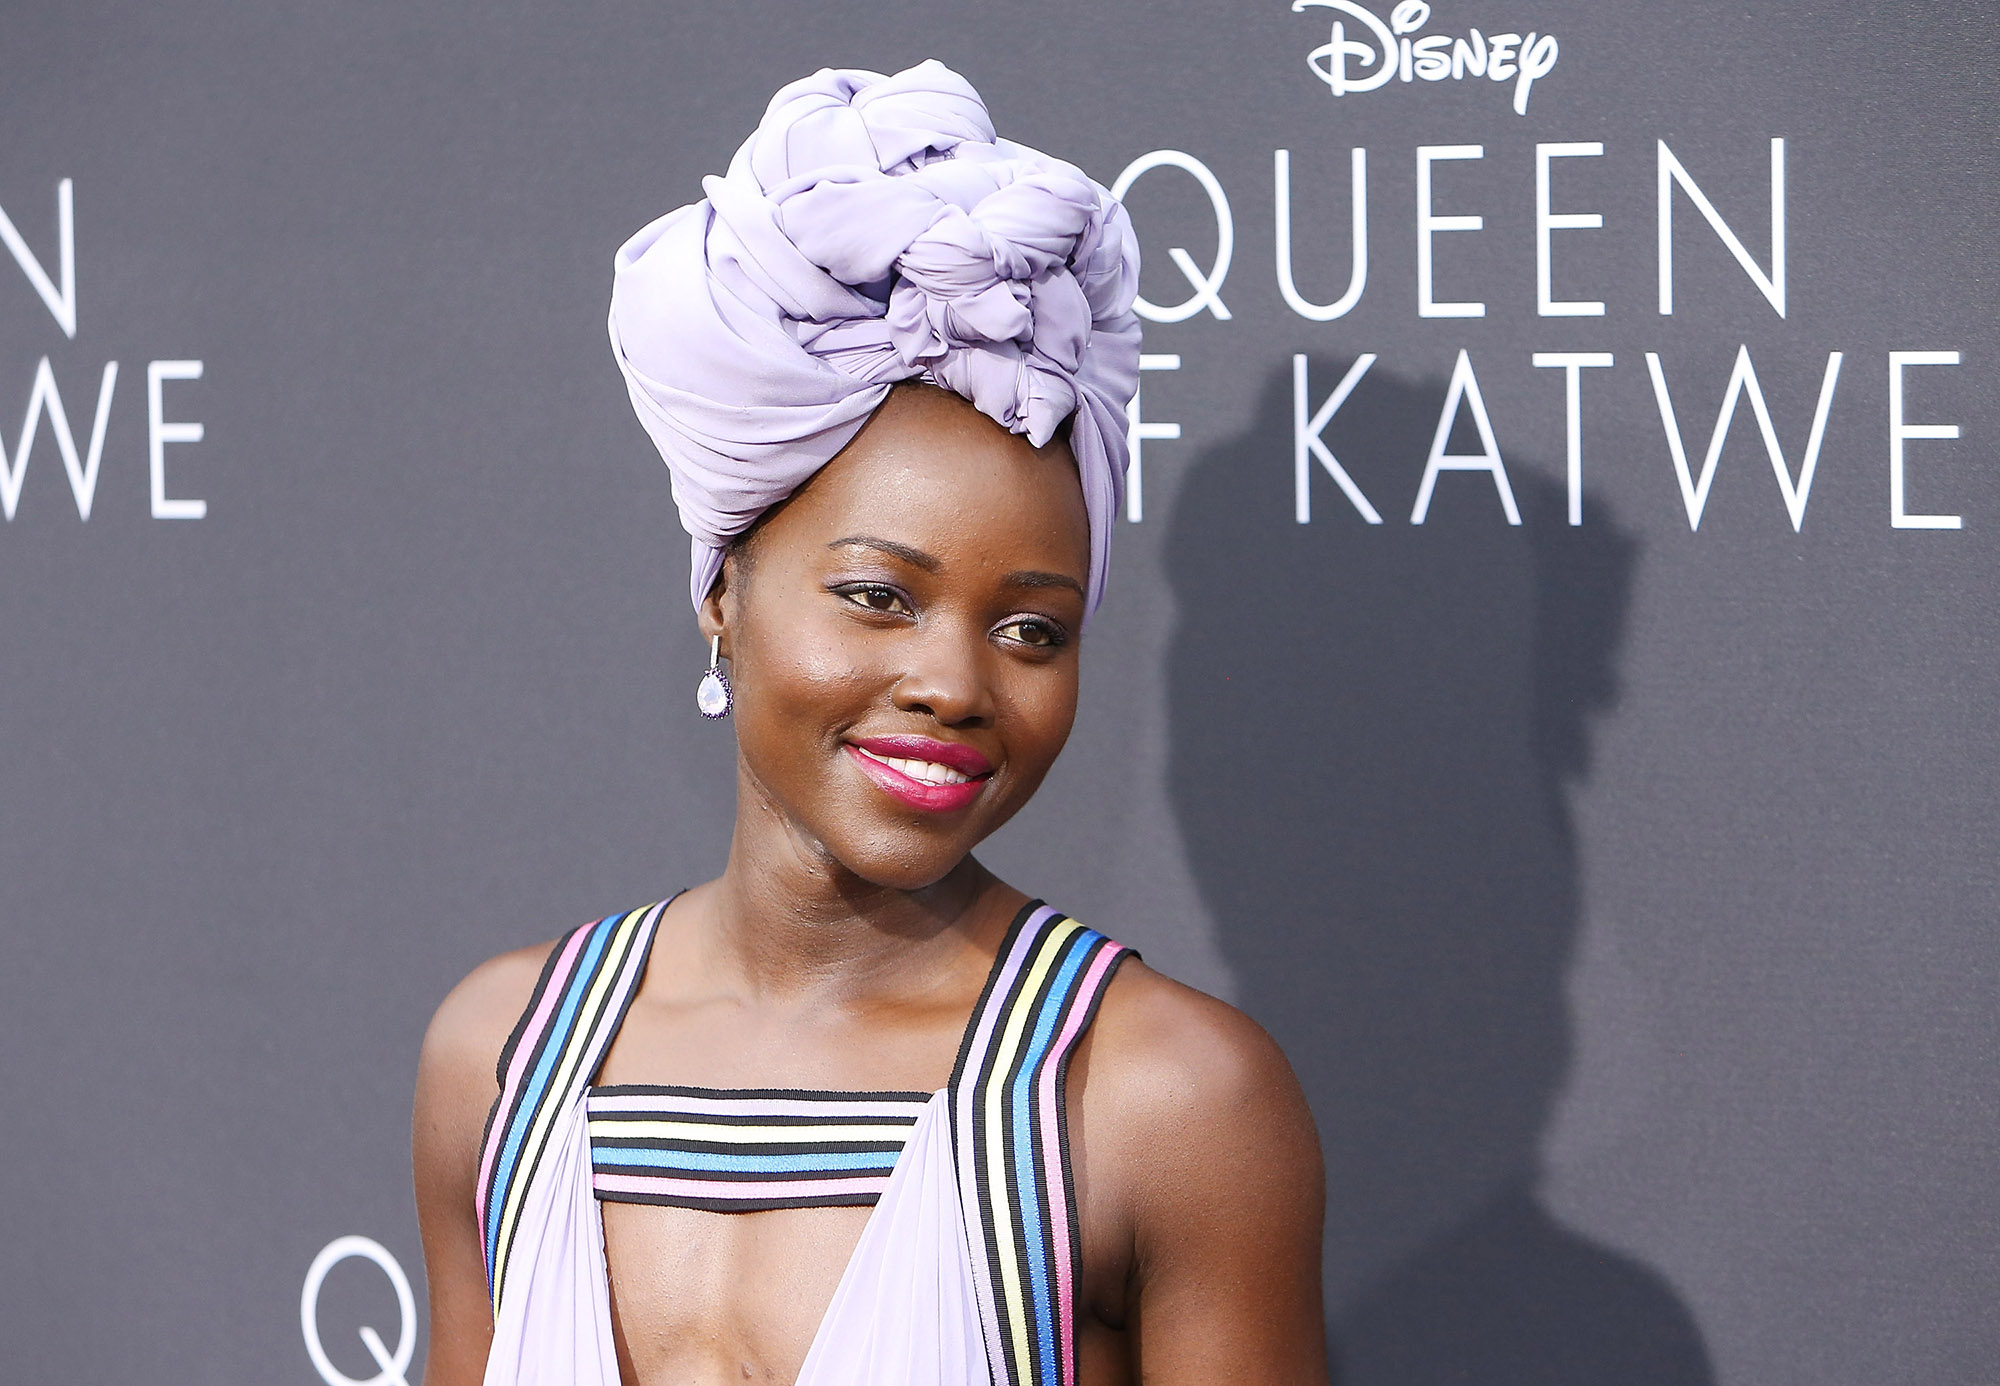 Lupita Nyong'o arrives at the Los Angeles premiere of Disney's "Queen Of Katwe" held at the El Capitan Theatre on September 20, 2016 in Hollywood, California.  (Photo by Michael Tran/FilmMagic) (Michael Tran&mdash;FilmMagic)